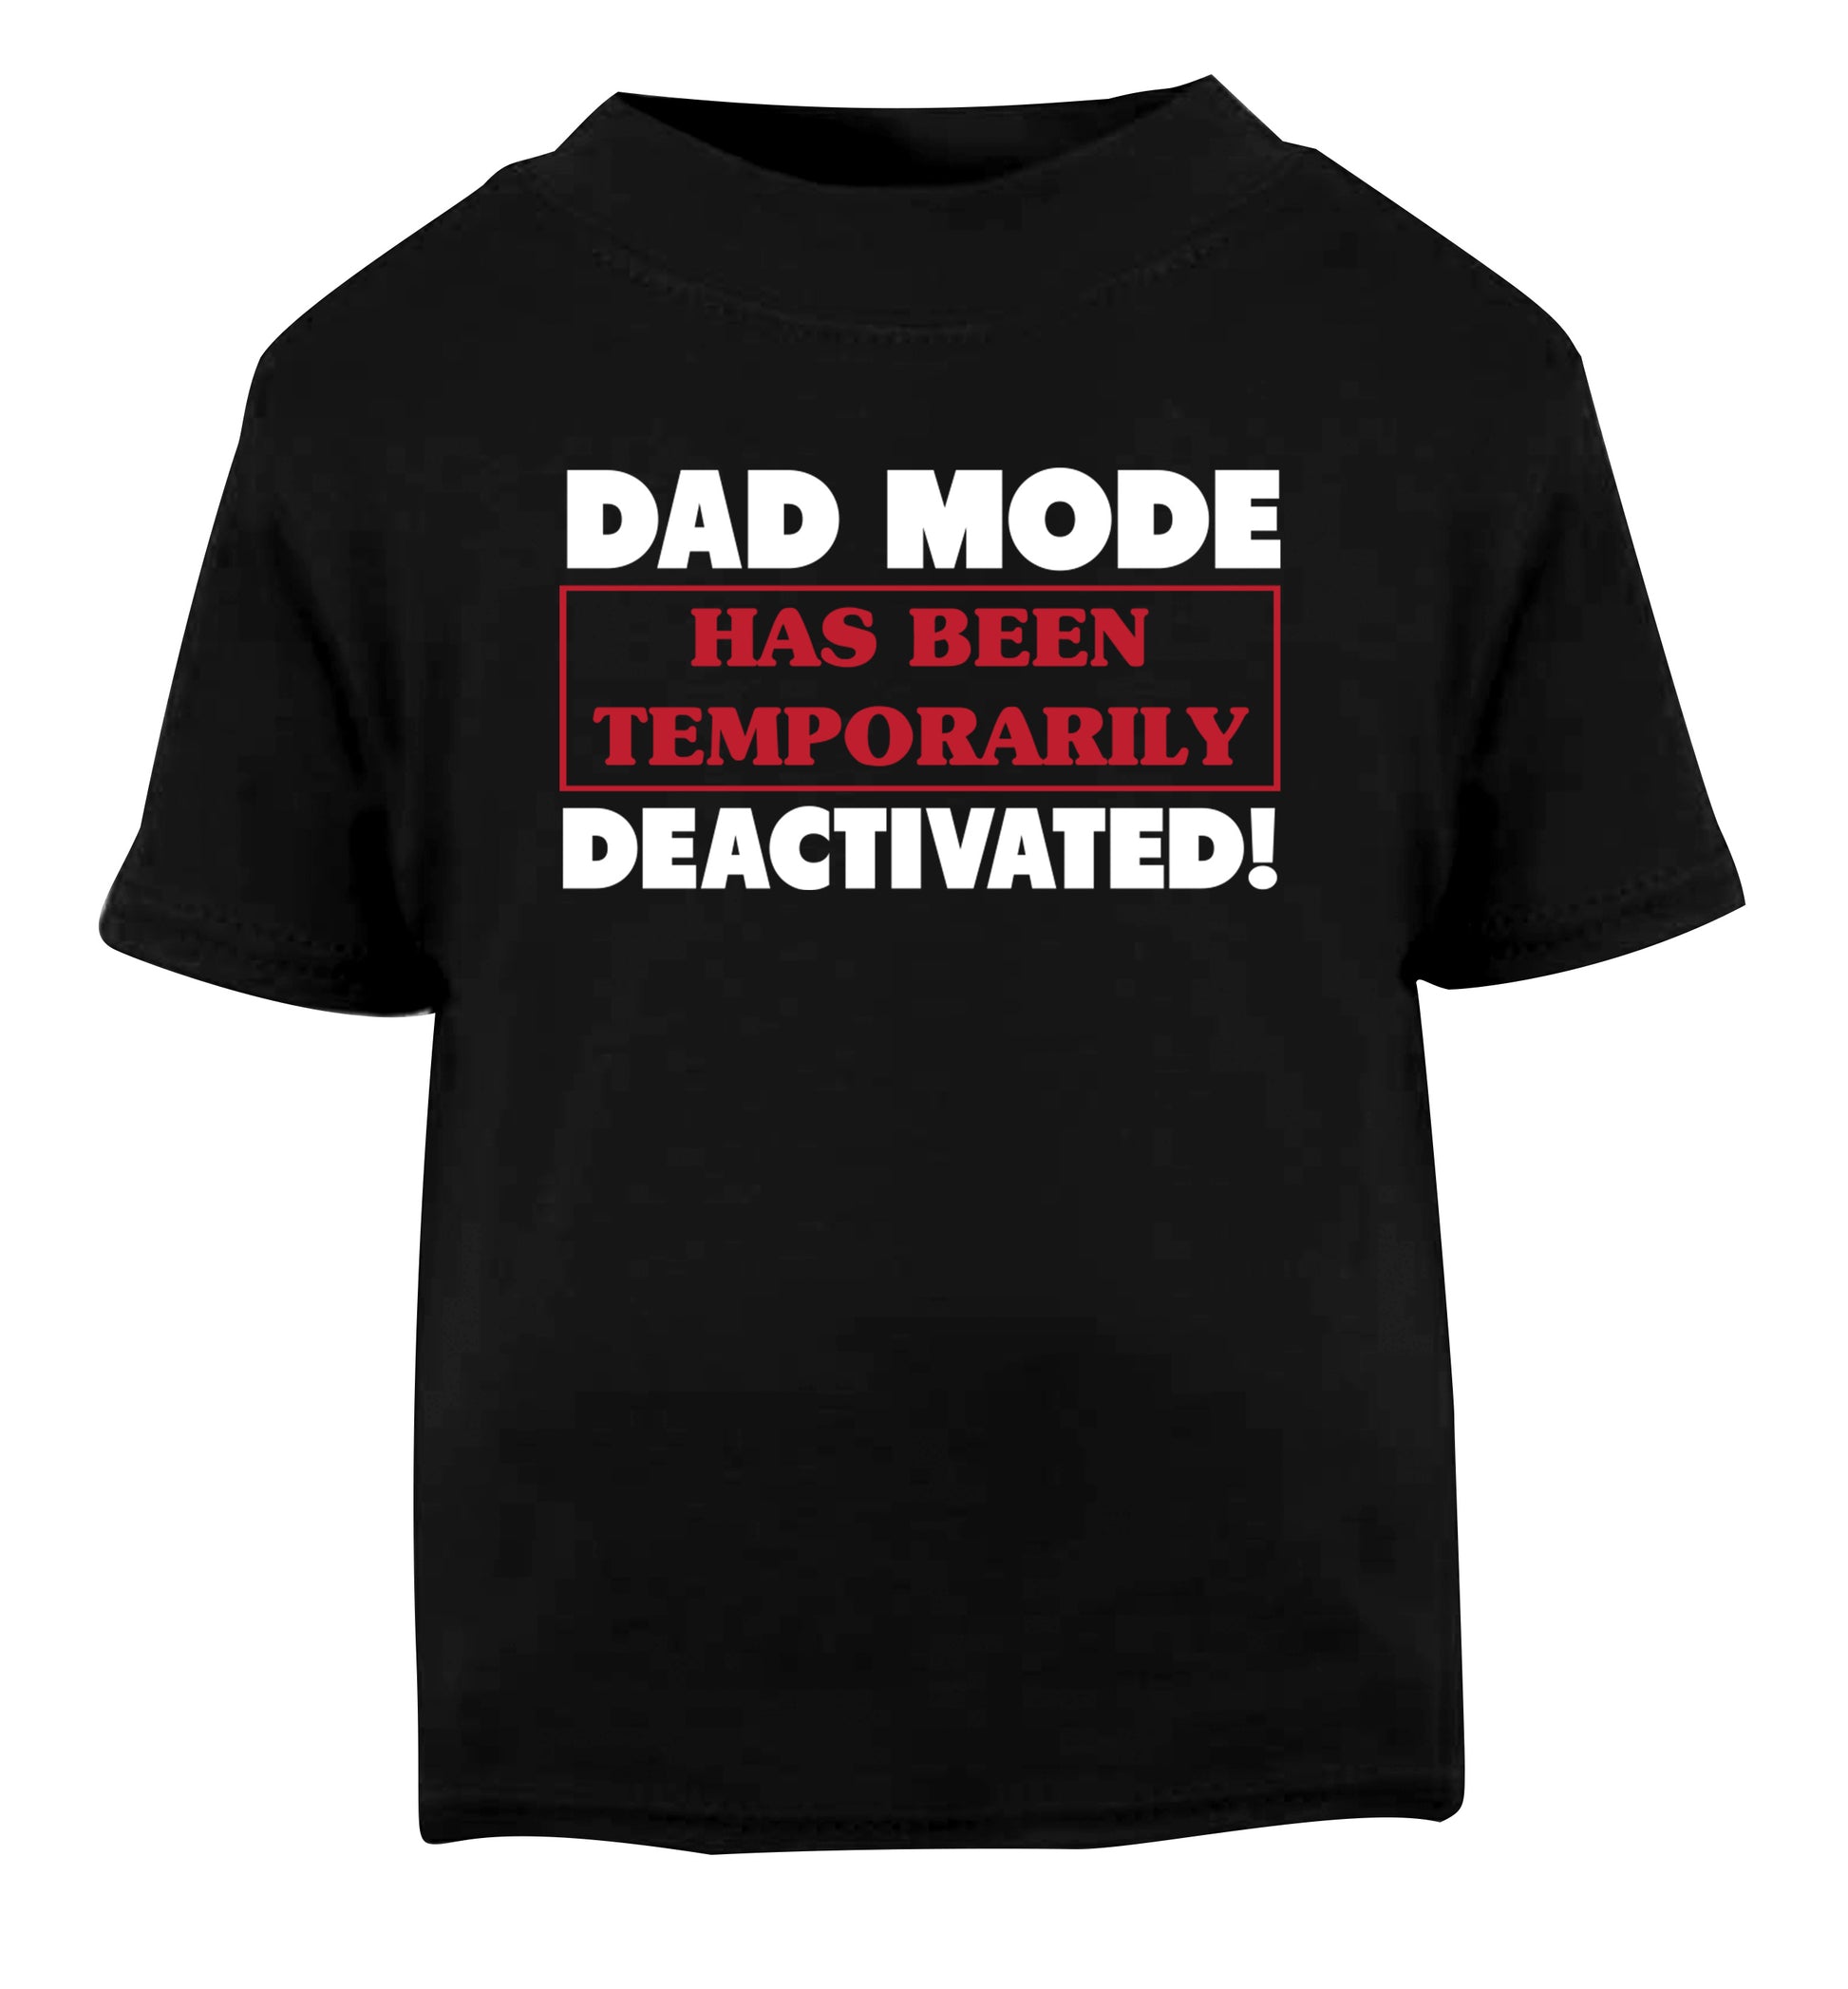 Dad mode has been temporarily deactivated! Black Baby Toddler Tshirt 2 years